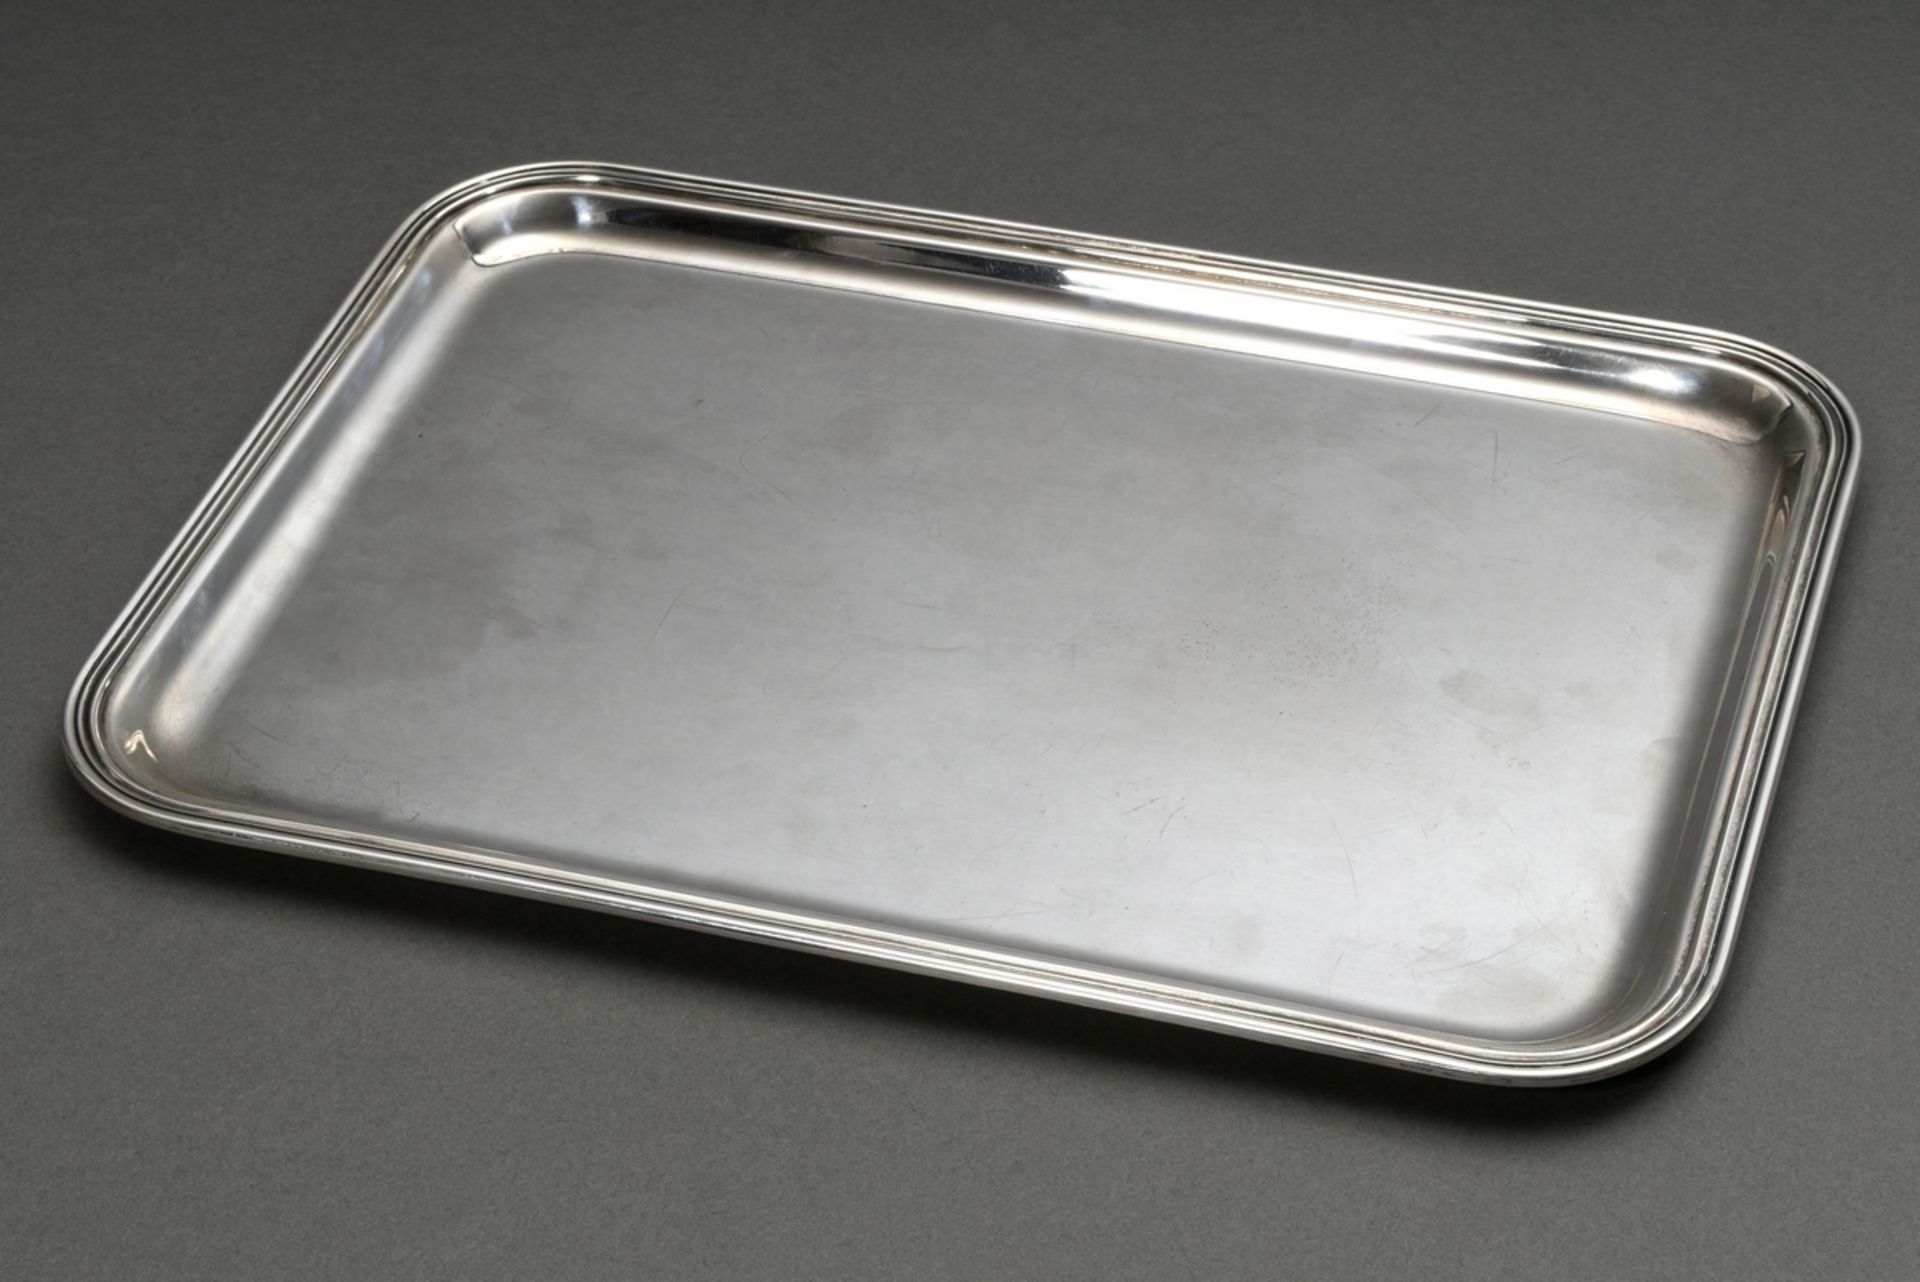 Rectangular tray in a simple design, silver 800, 745g, 36x26cm